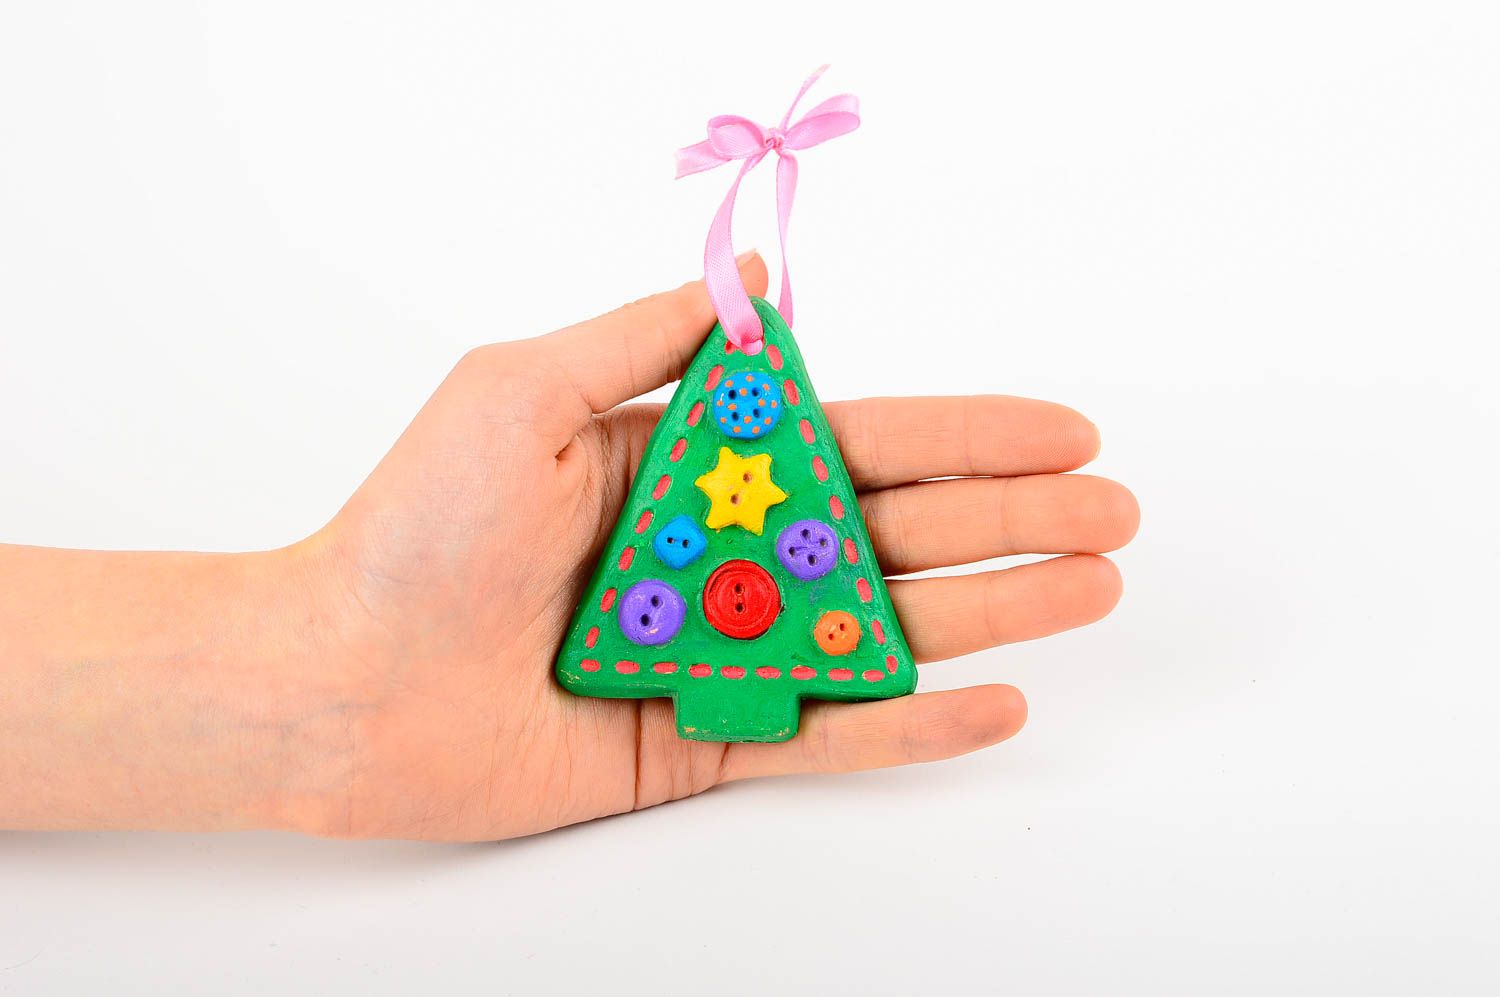 Homemade home decor Christmas tree ornament for decorative use only cool gifts photo 2